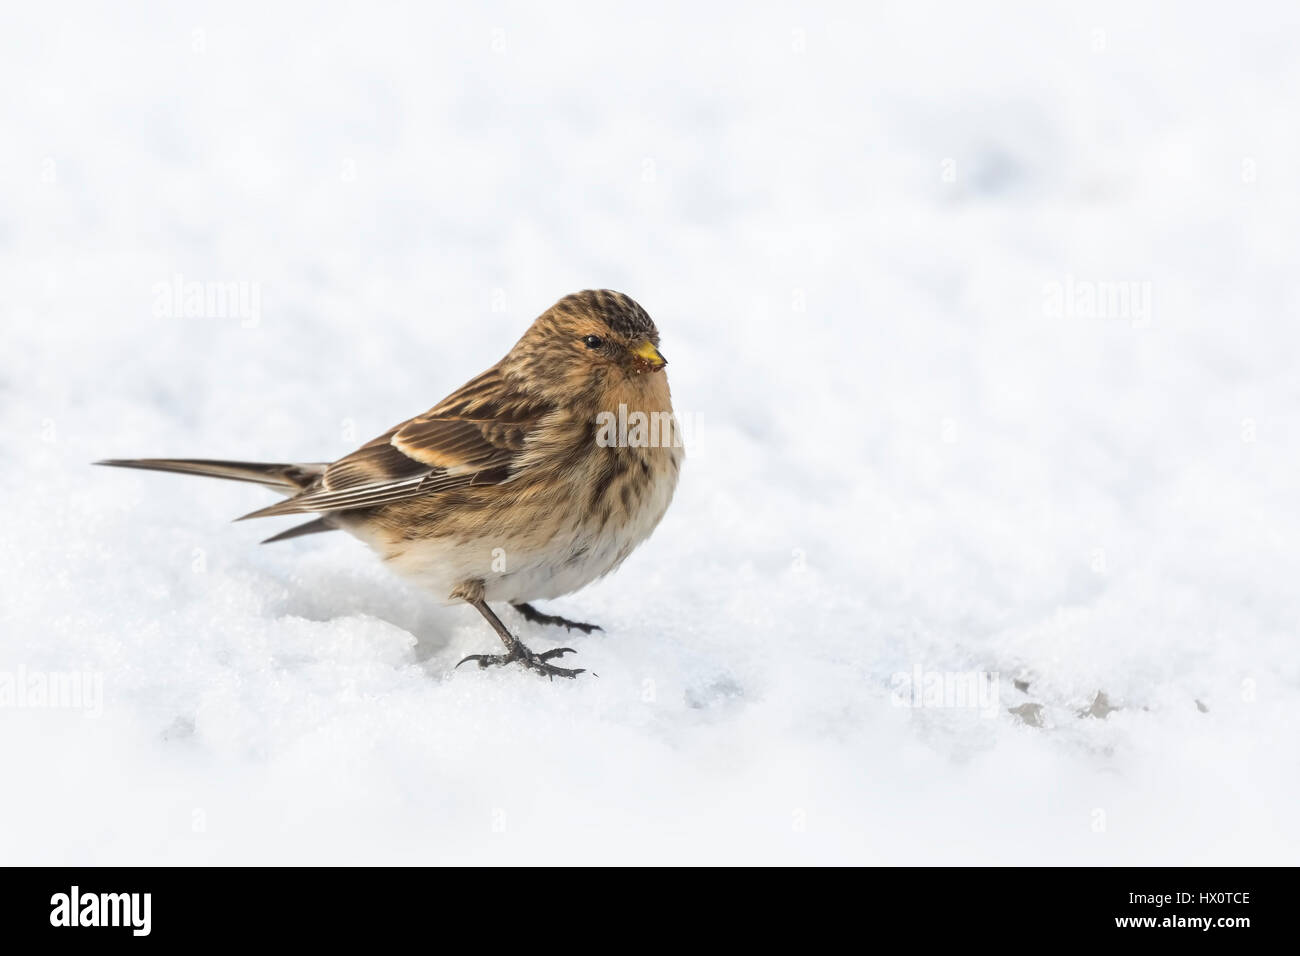 Closeup of a Twite (Carduelis flavirostris) during winter season in snow. A twite is a small brown passerine bird in the finch family Fringillidae. Stock Photo